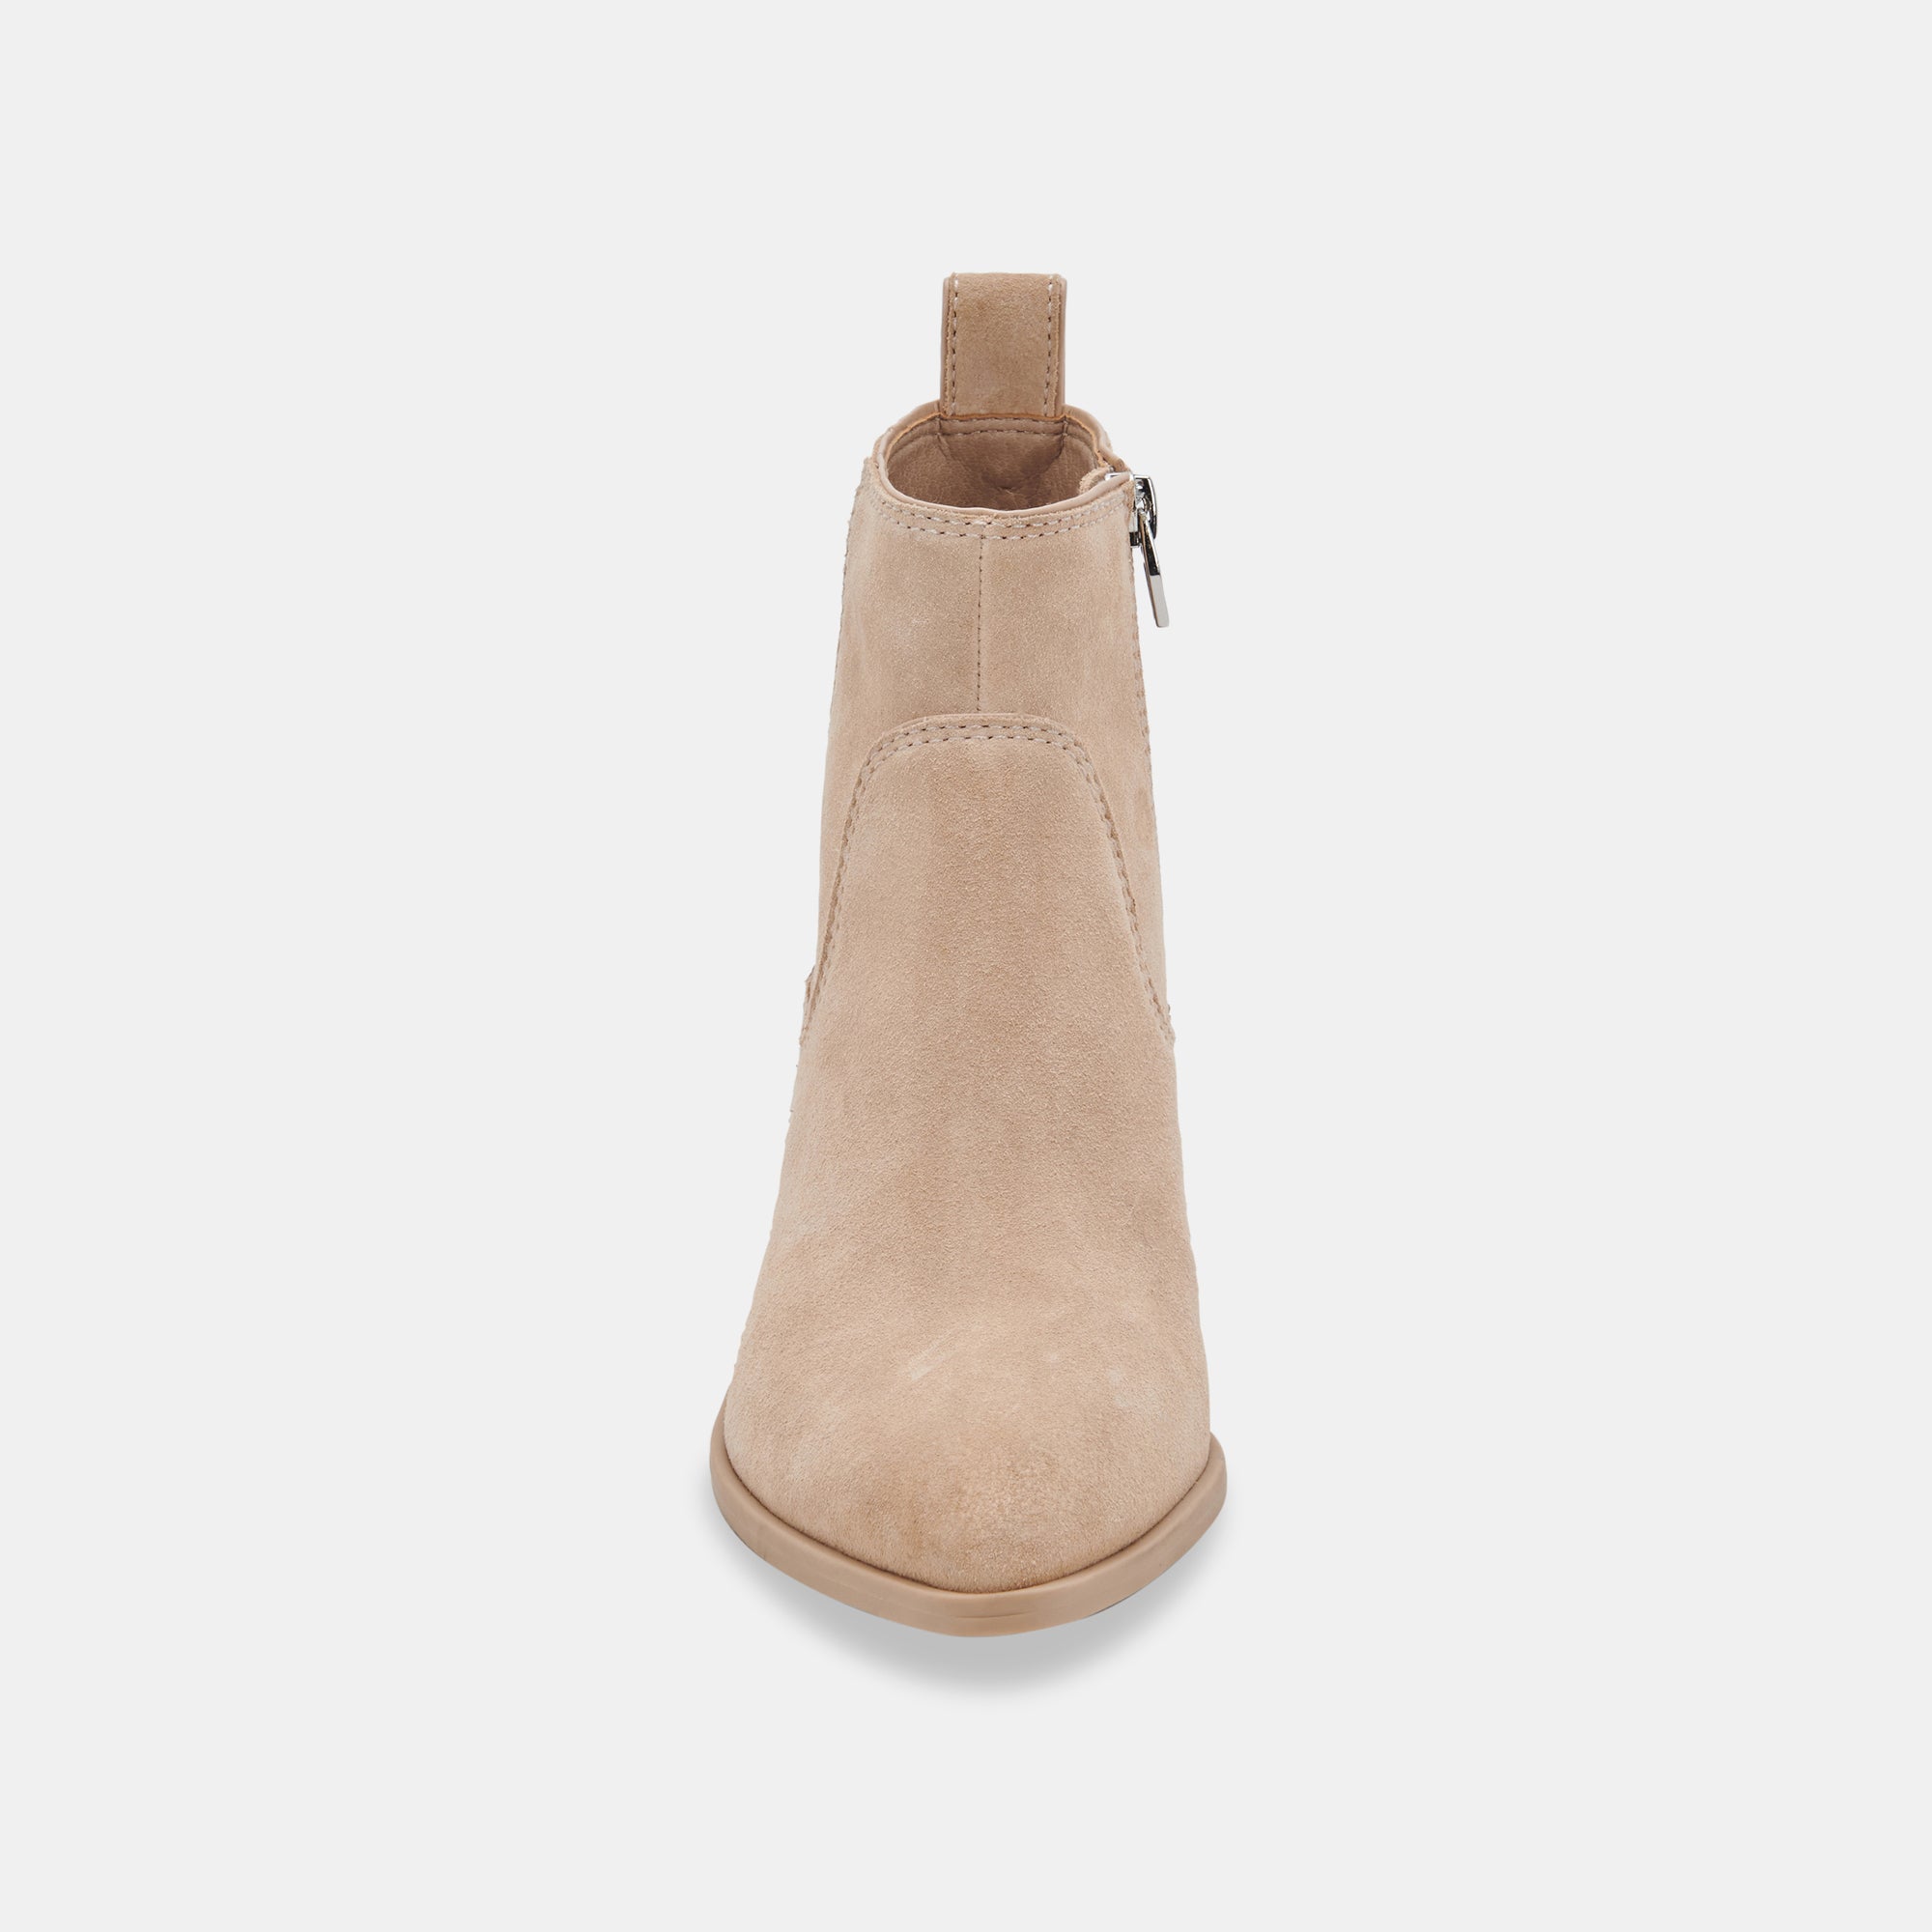 ABLE BOOTIES DUNE SUEDE re:vita – Dolce Vita